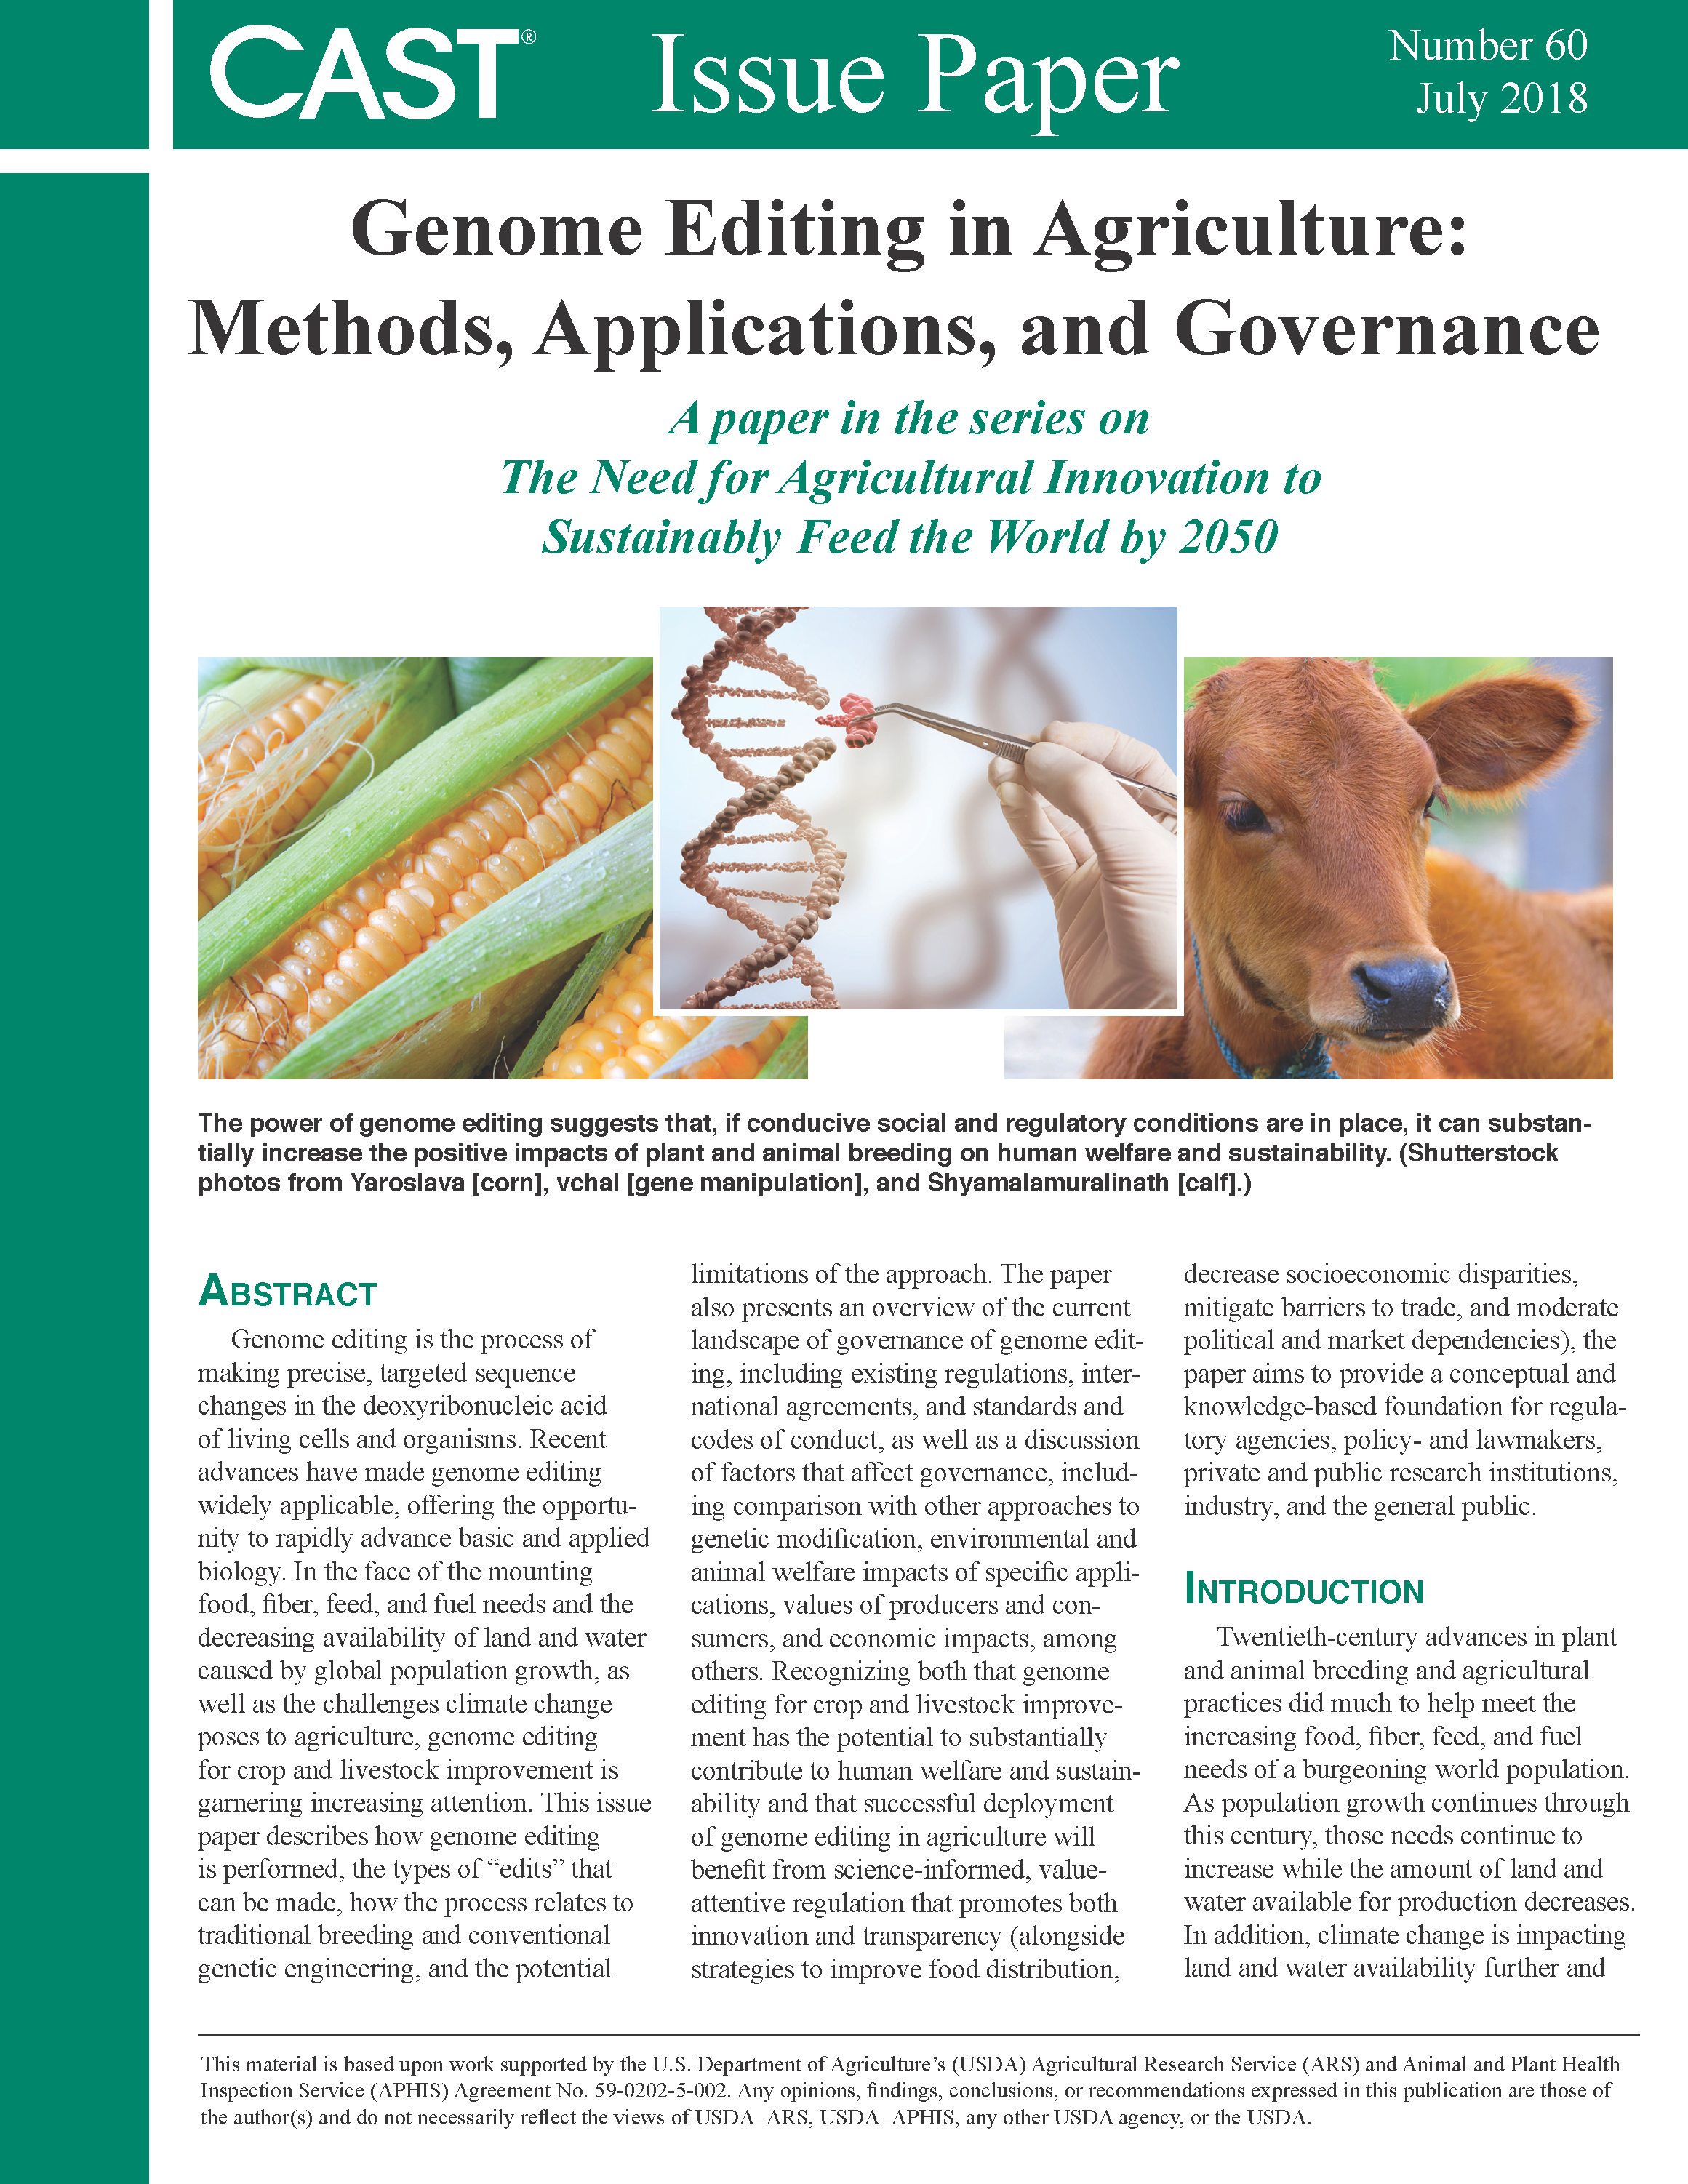 Genome Editing in Agriculture--New CAST Issue Paper